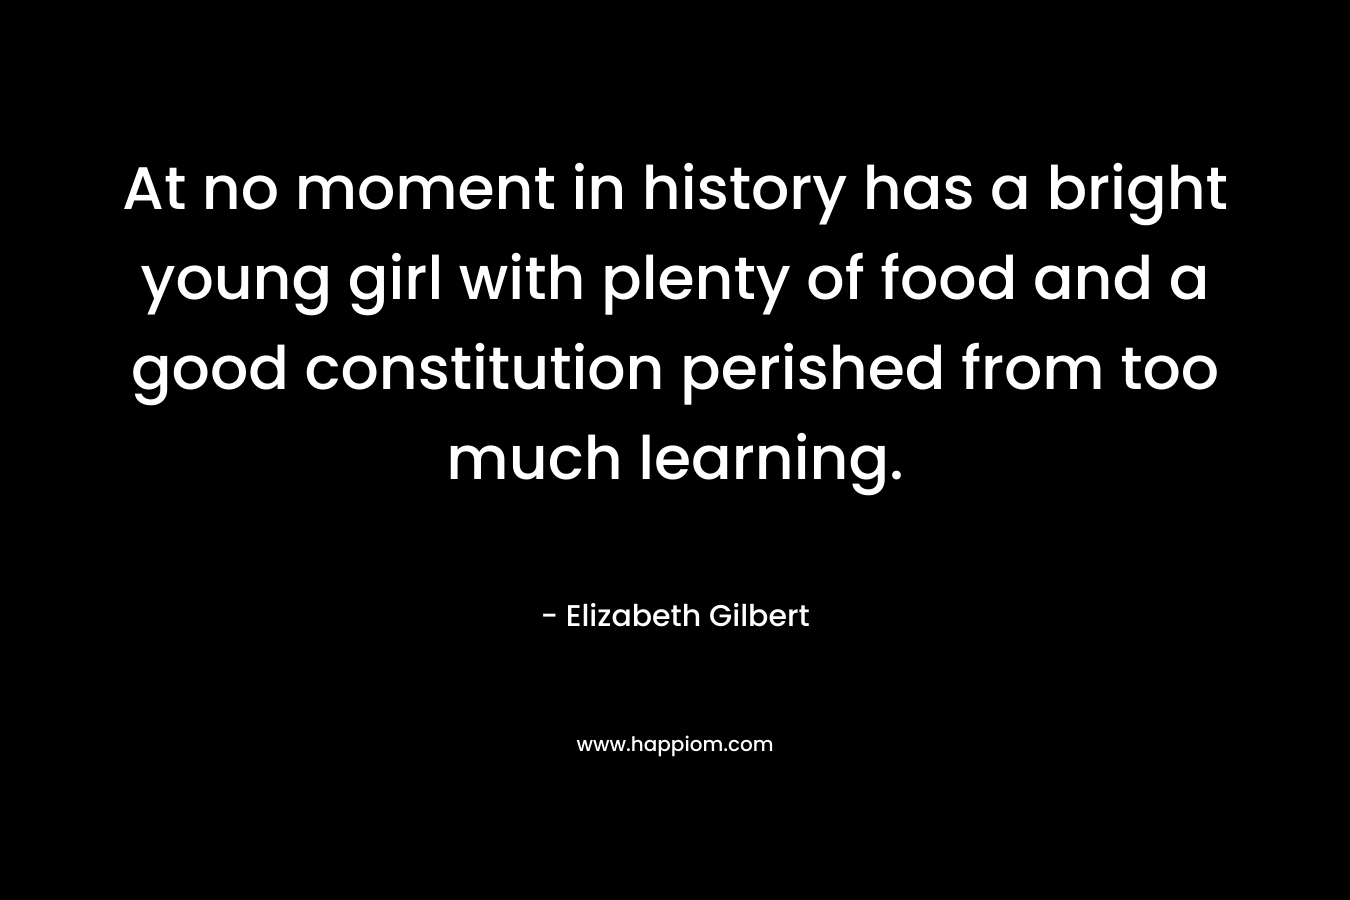 At no moment in history has a bright young girl with plenty of food and a good constitution perished from too much learning.